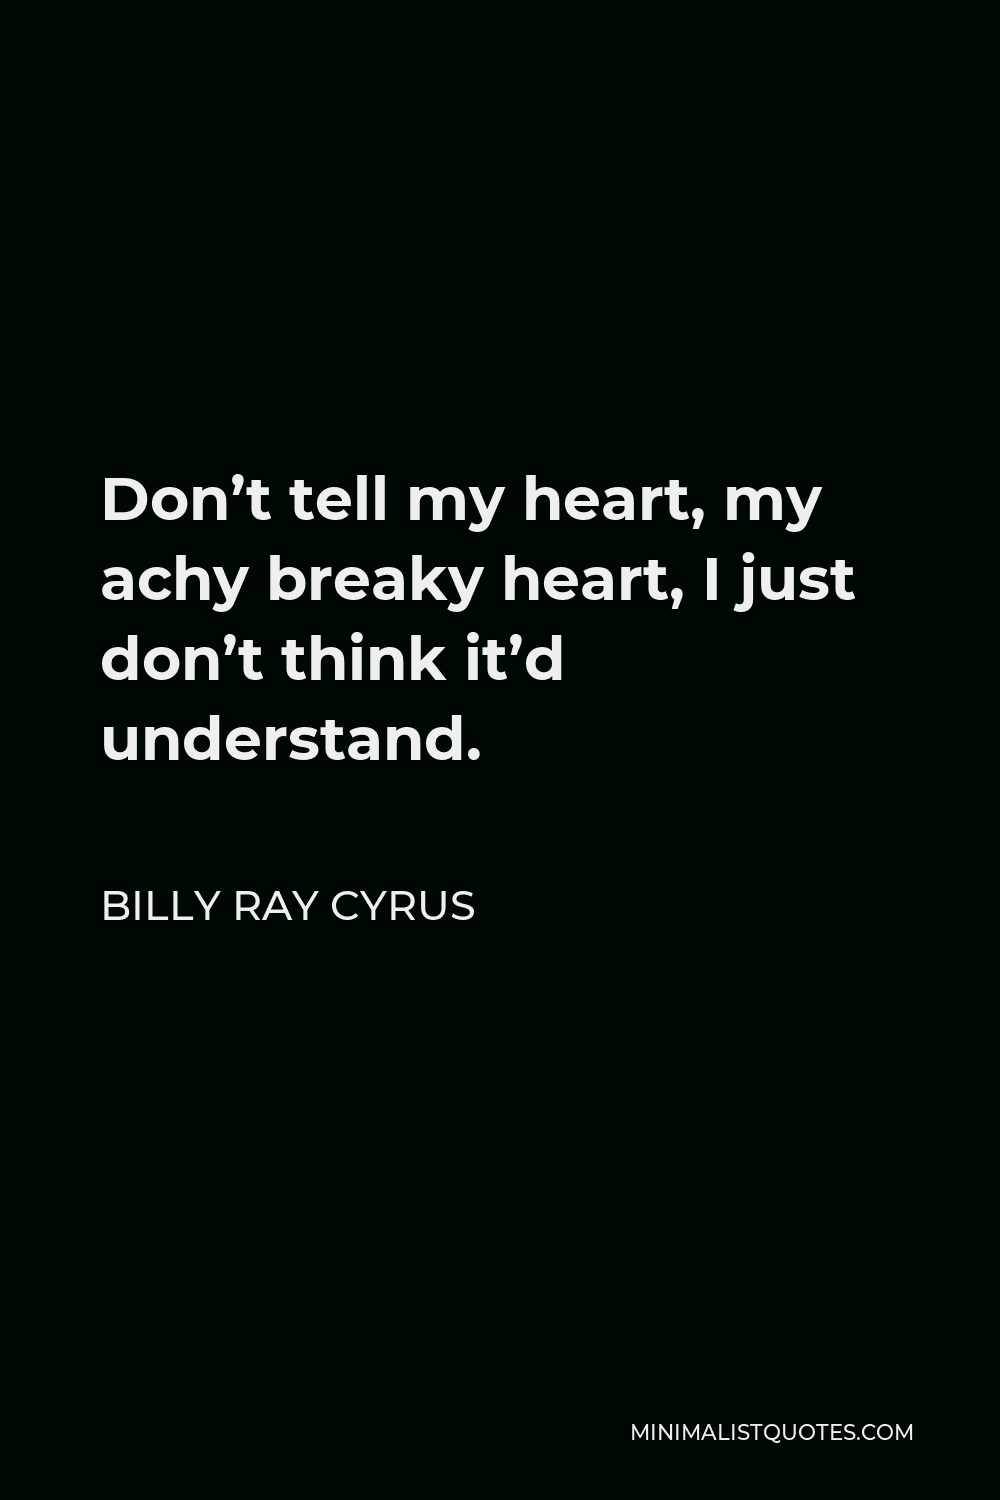 Billy Ray Cyrus Quote - Don’t tell my heart, my achy breaky heart, I just don’t think it’d understand.